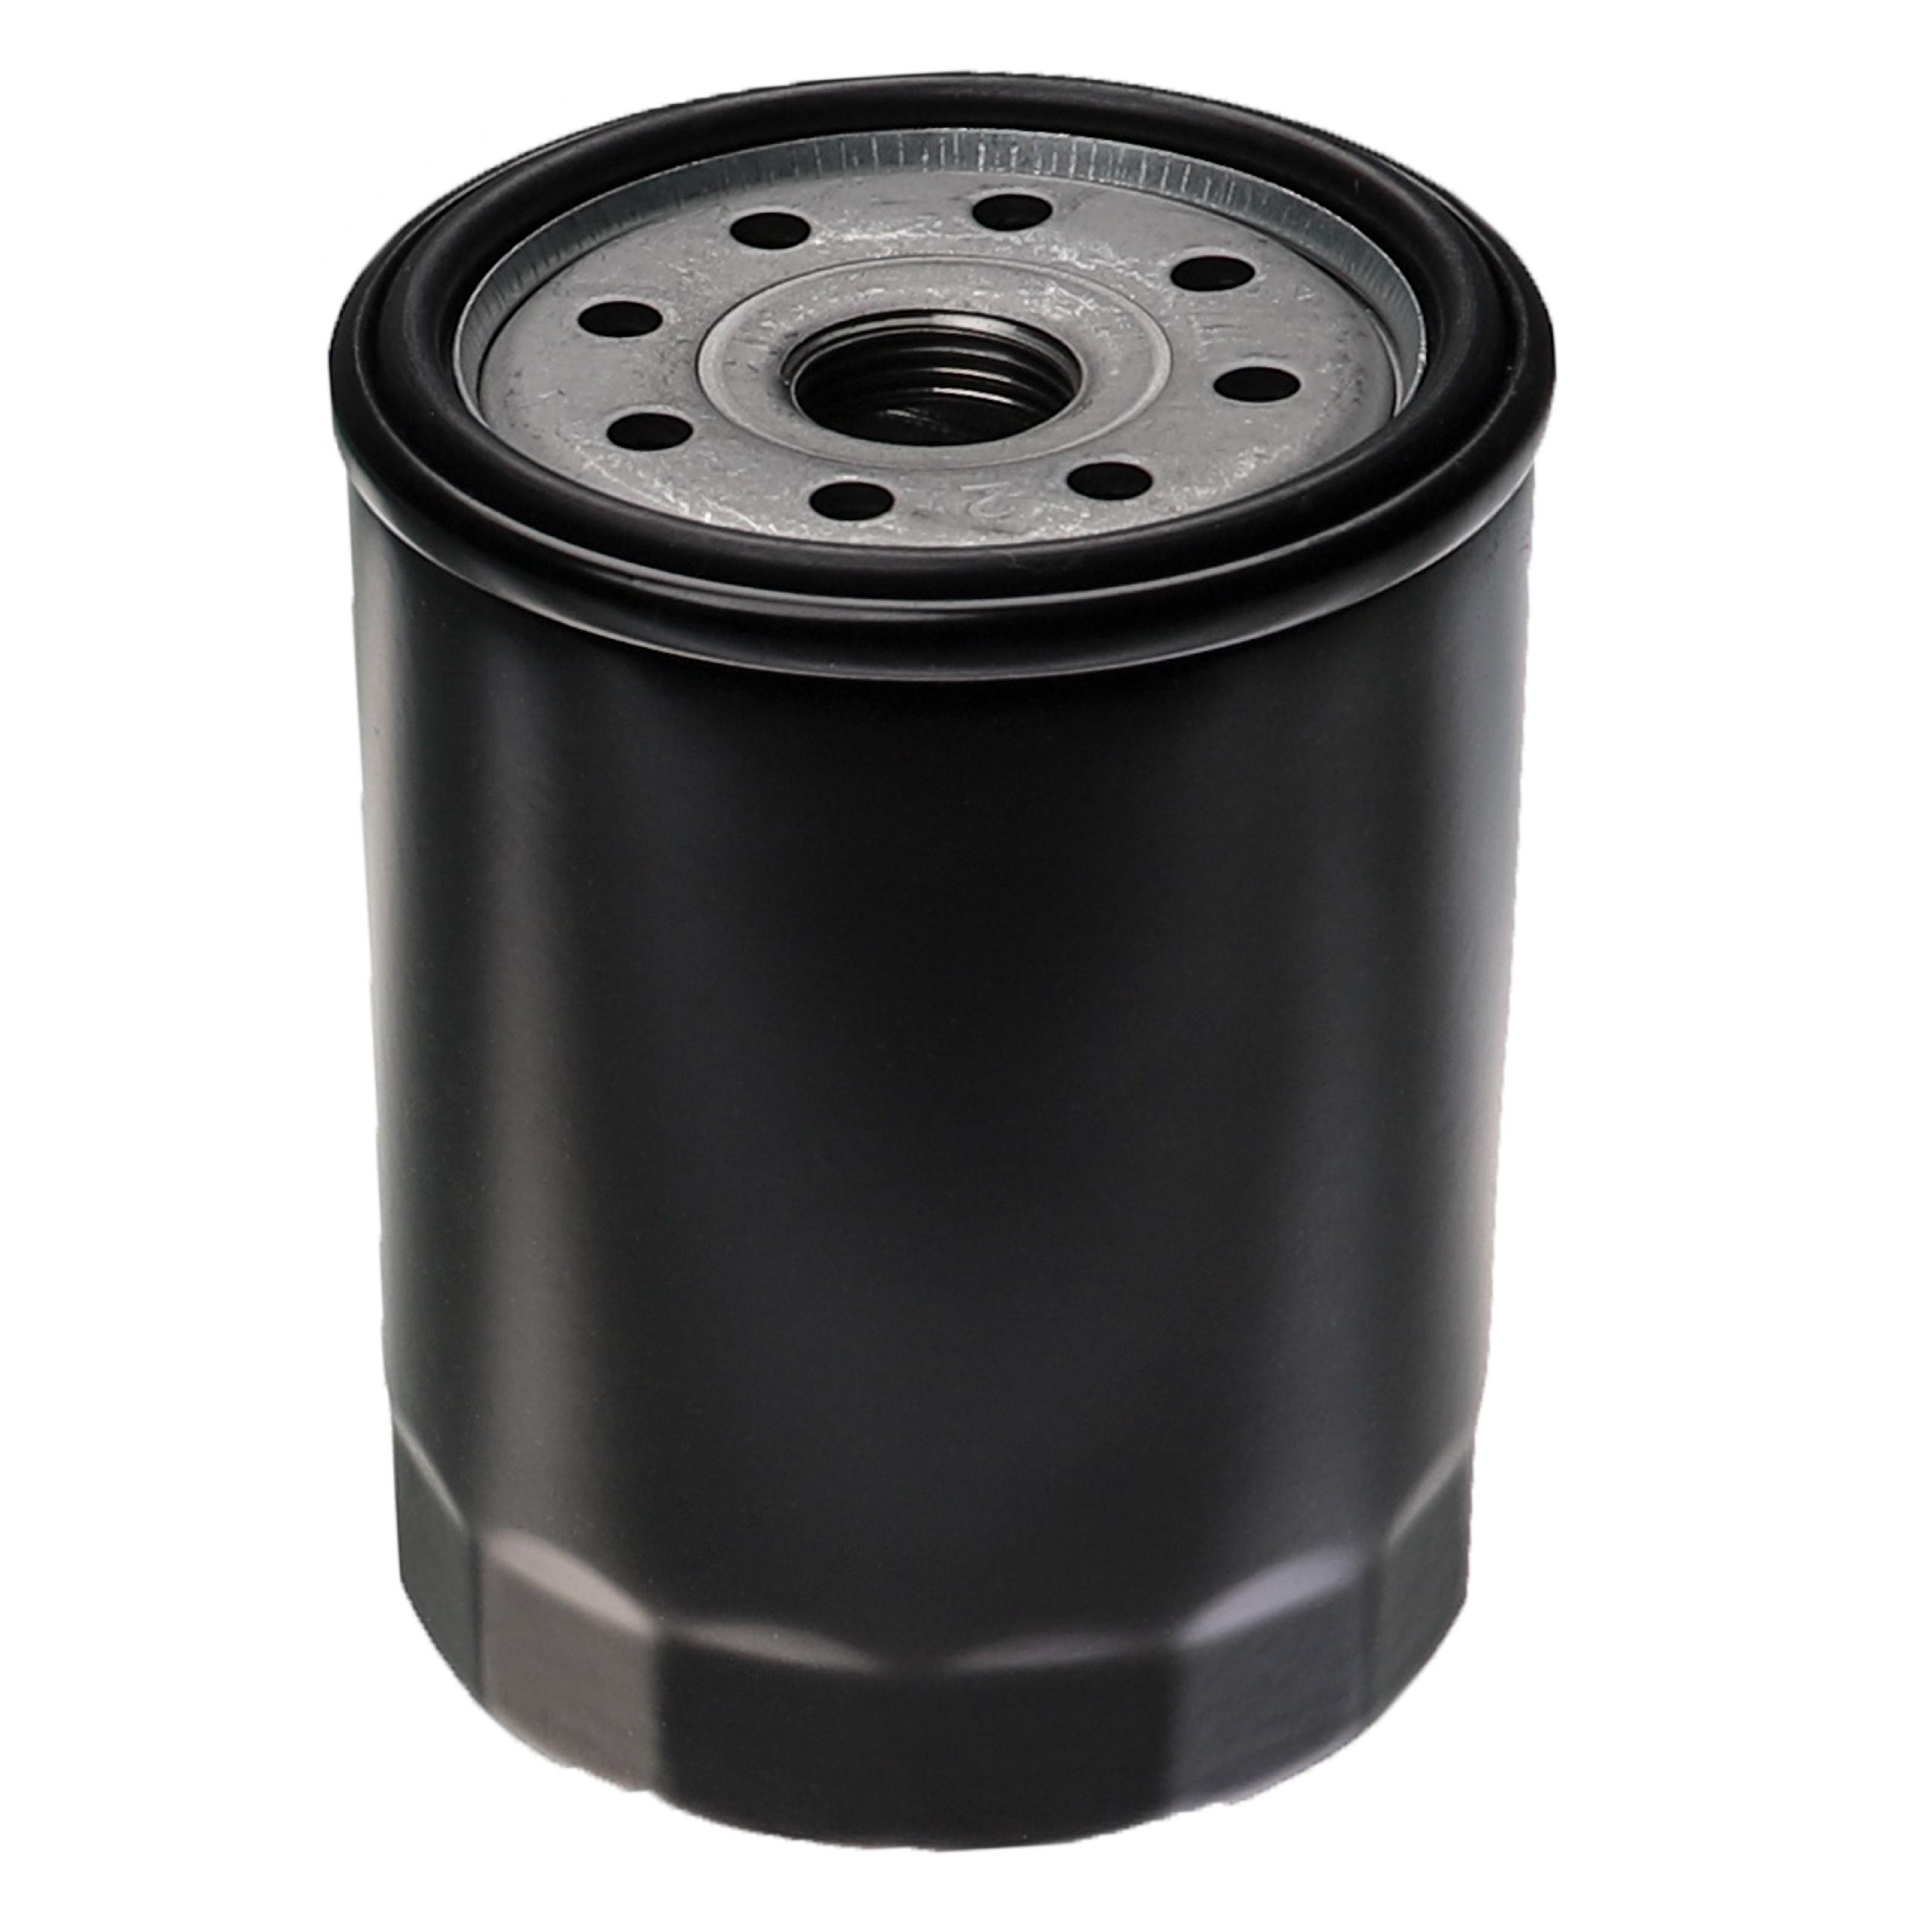 Vehicle Oil Filter as Replacement for Alco Filter SP-994 - Spare Filter